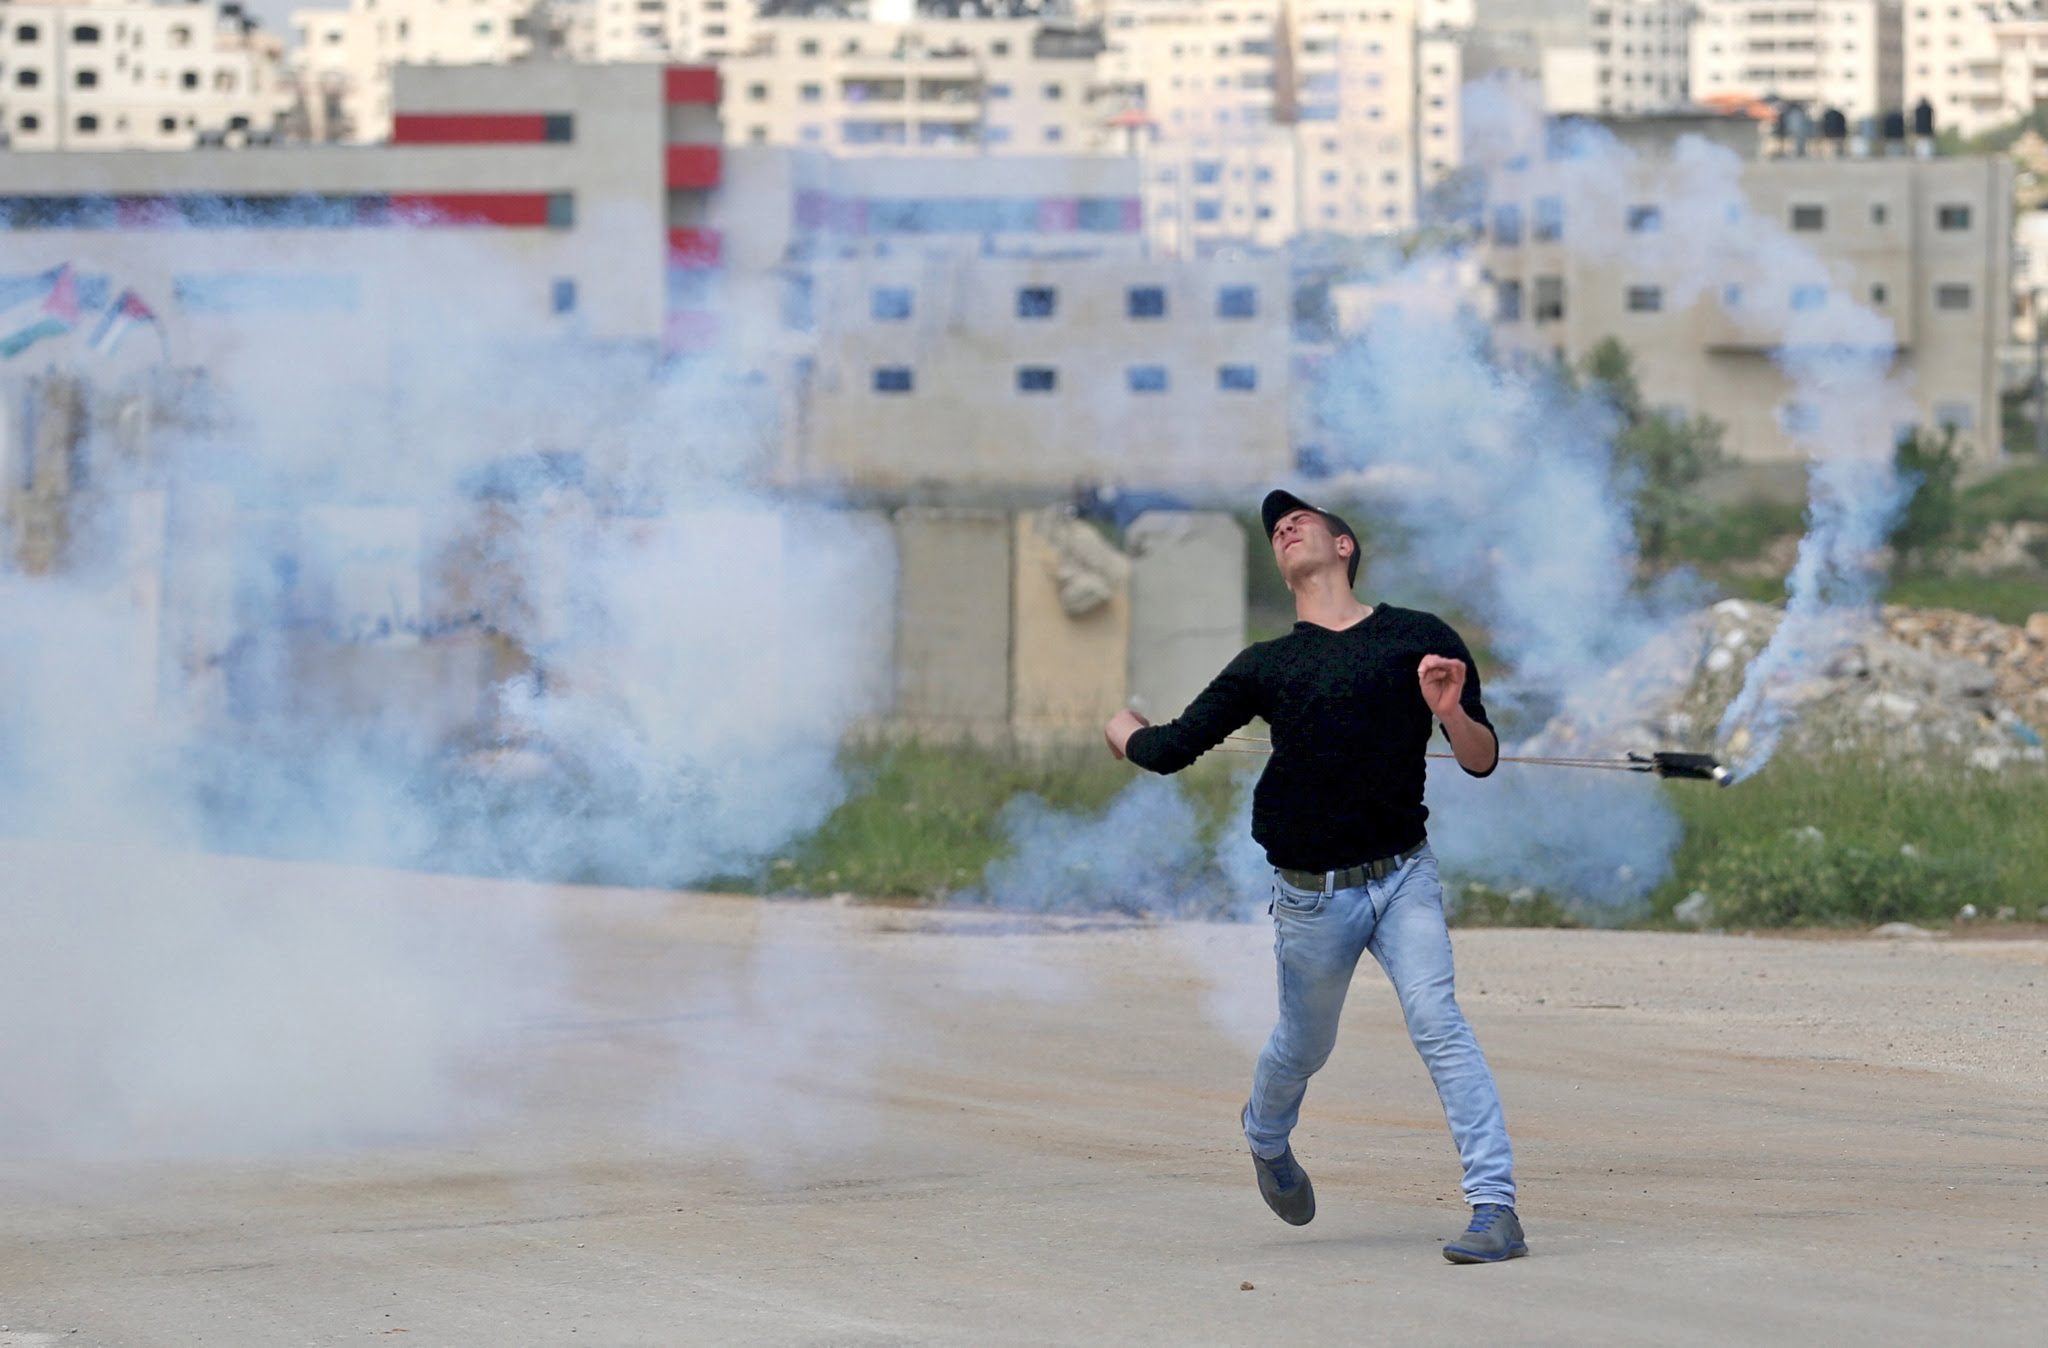 A Palestinian protester uses a sling to return a tear gas canister fired by Israeli troops during clashes at a protest marking Land Day, near Israel's Ofer Prison near the West Bank city of Ramallah March 30, 2016. March 30 marks Land Day, the annual commemoration of protests in 1976 against Israel's appropriation of Arab-owned land in the Galilee